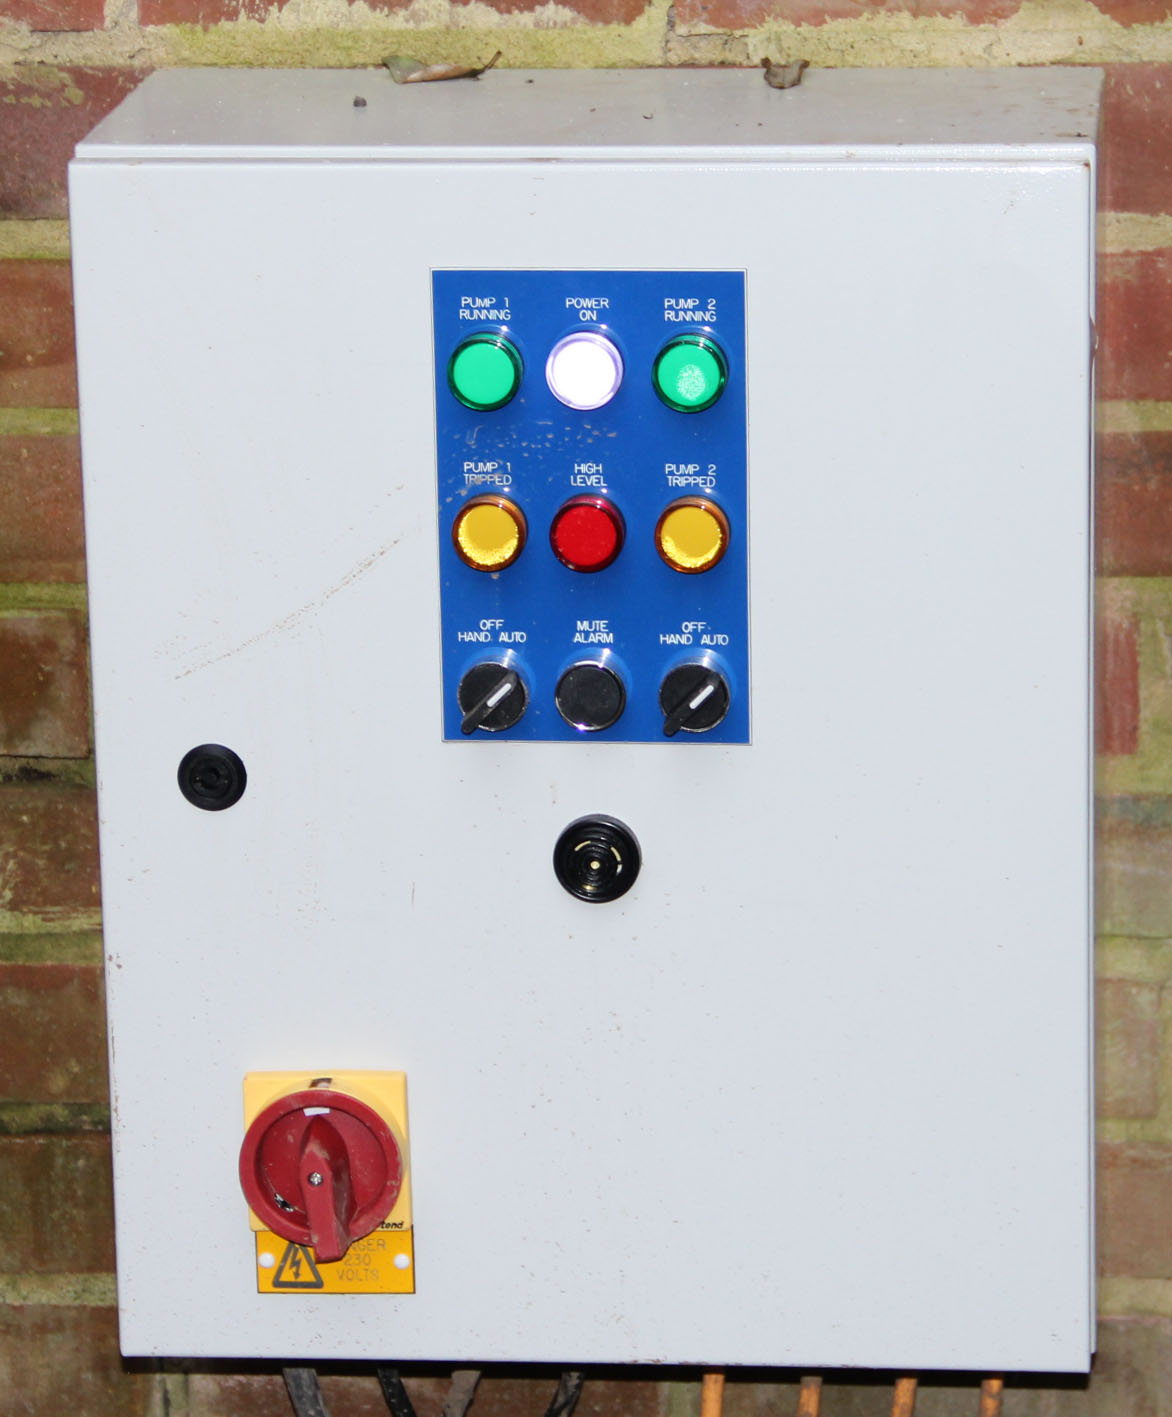 A photo of a pumping station alarm system located in the garage.